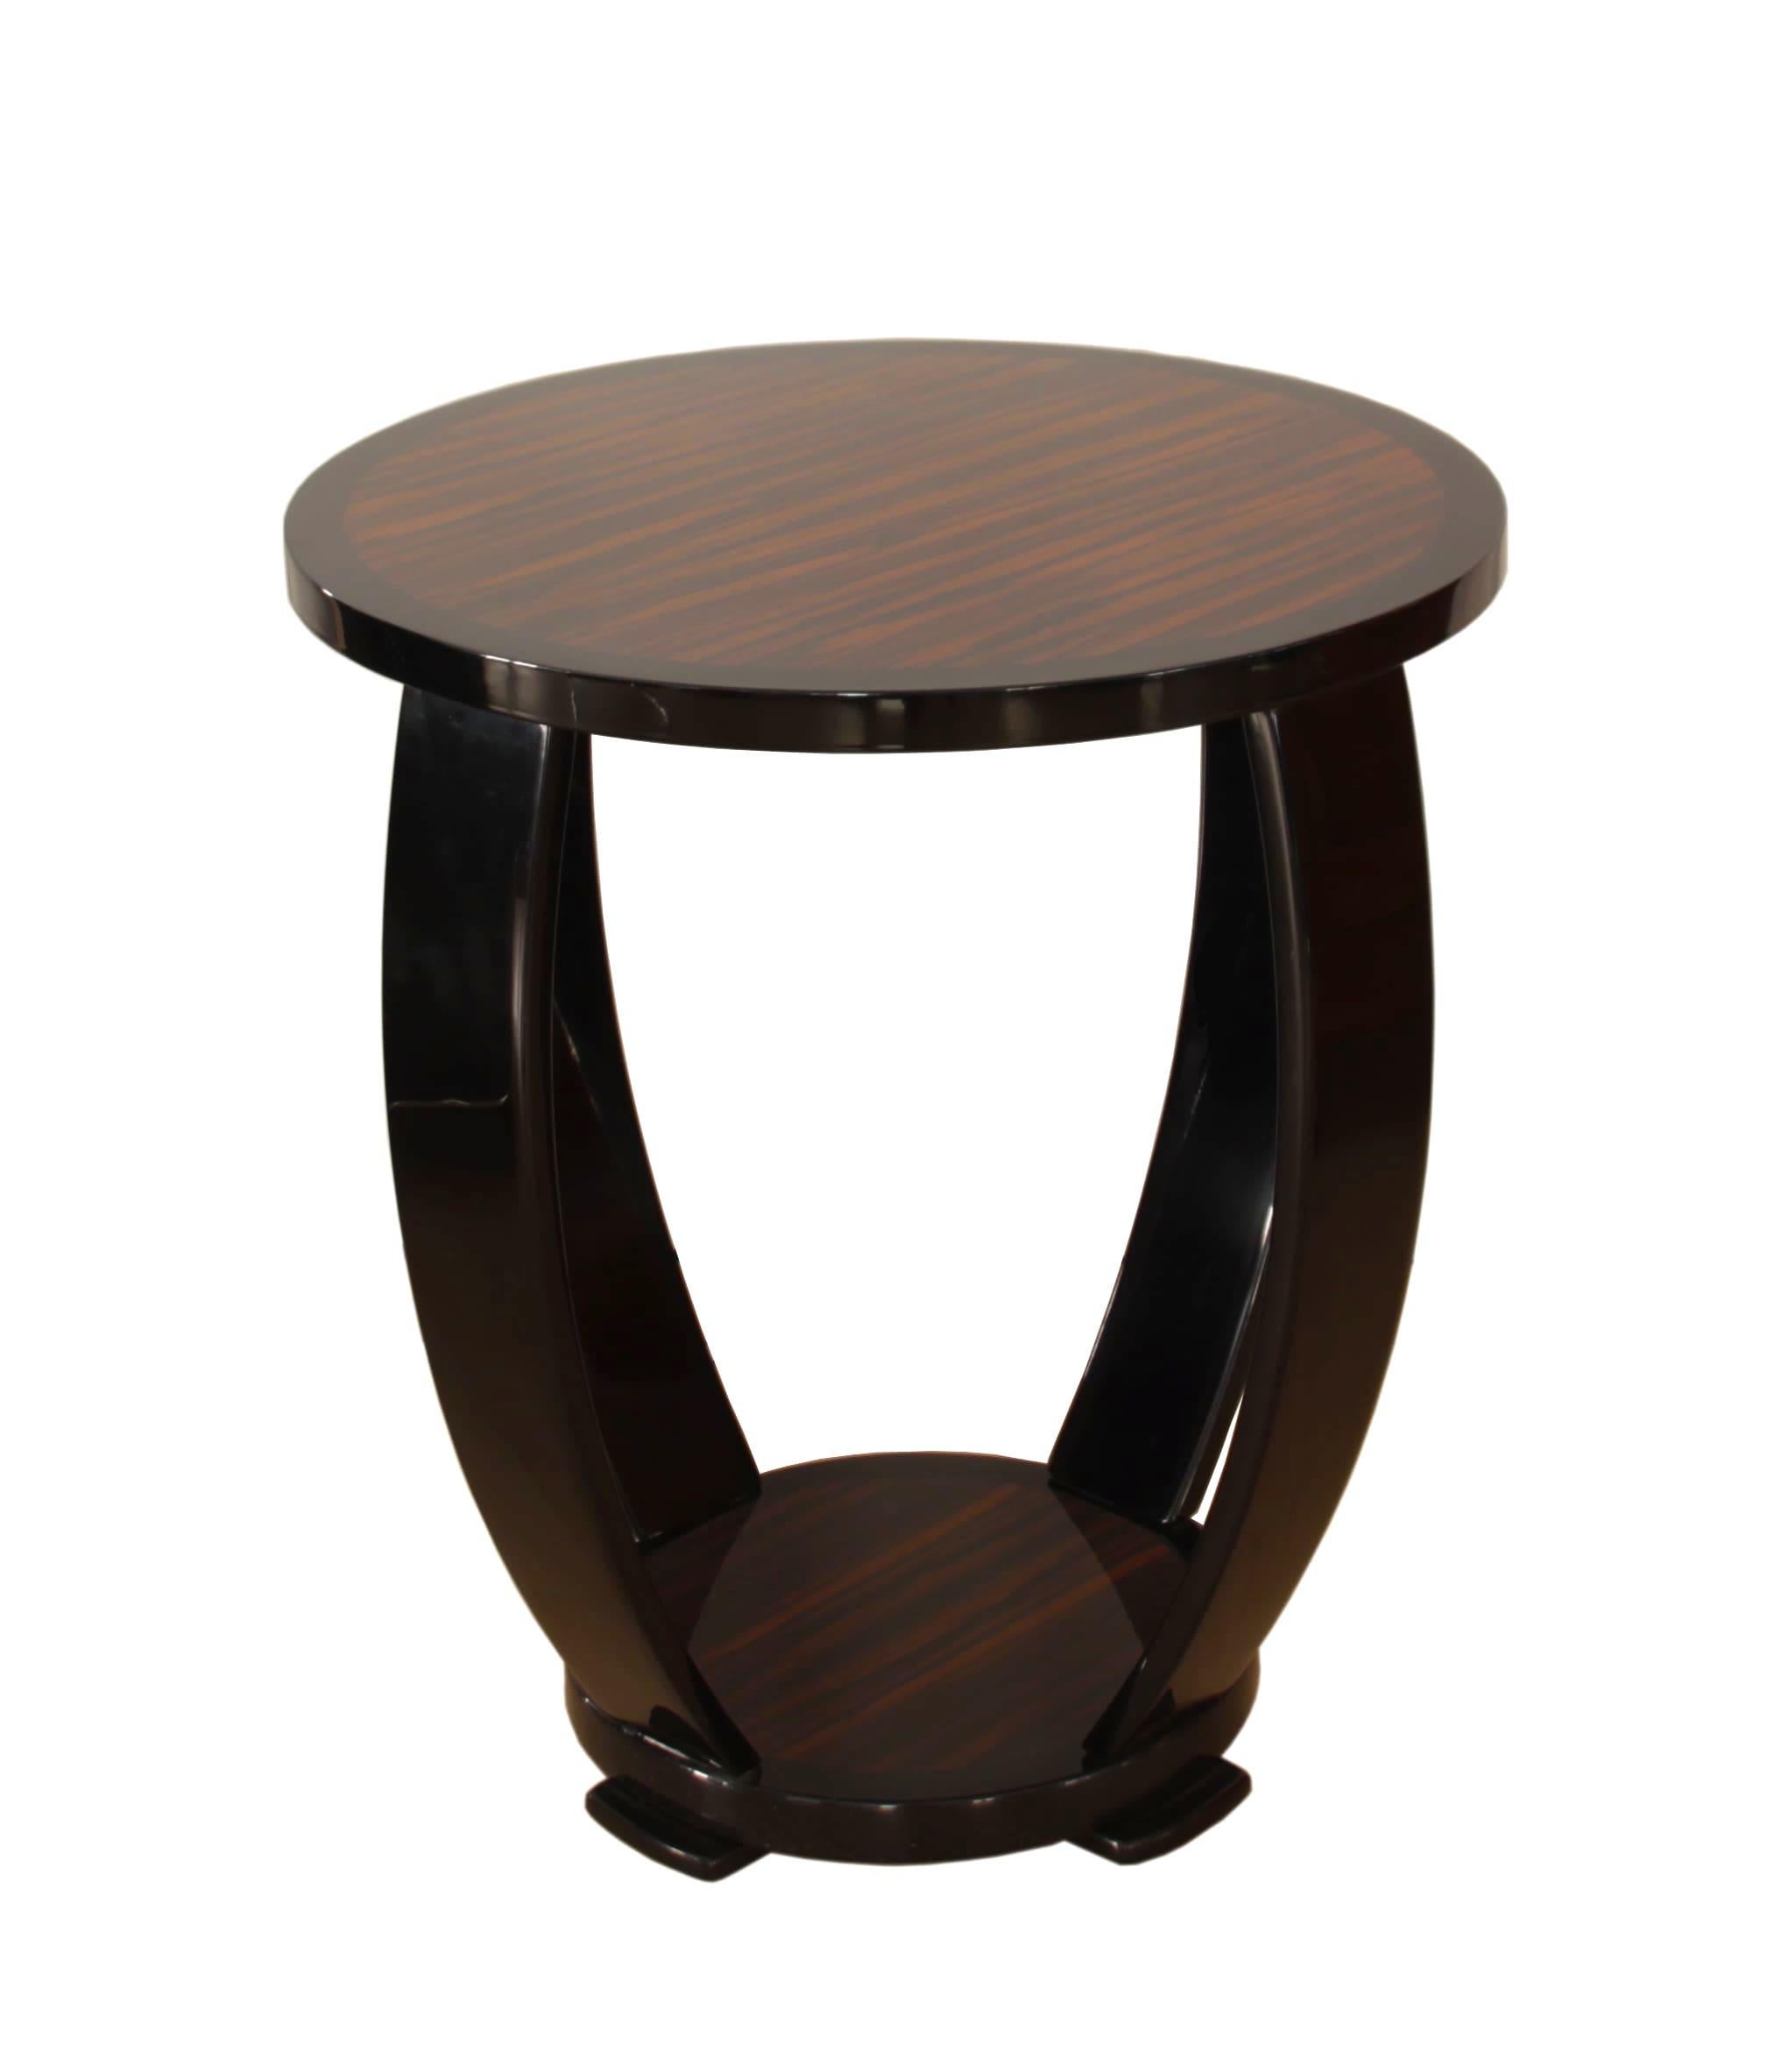 Elegant and Classic French Art Deco style side table or Guéridon.

Plates veneered in Macassar. Side bolsters ebonized / black lacquered.
Amazing hard Polyester piano lacquer, polished.

Handcrafted after original design, built in South